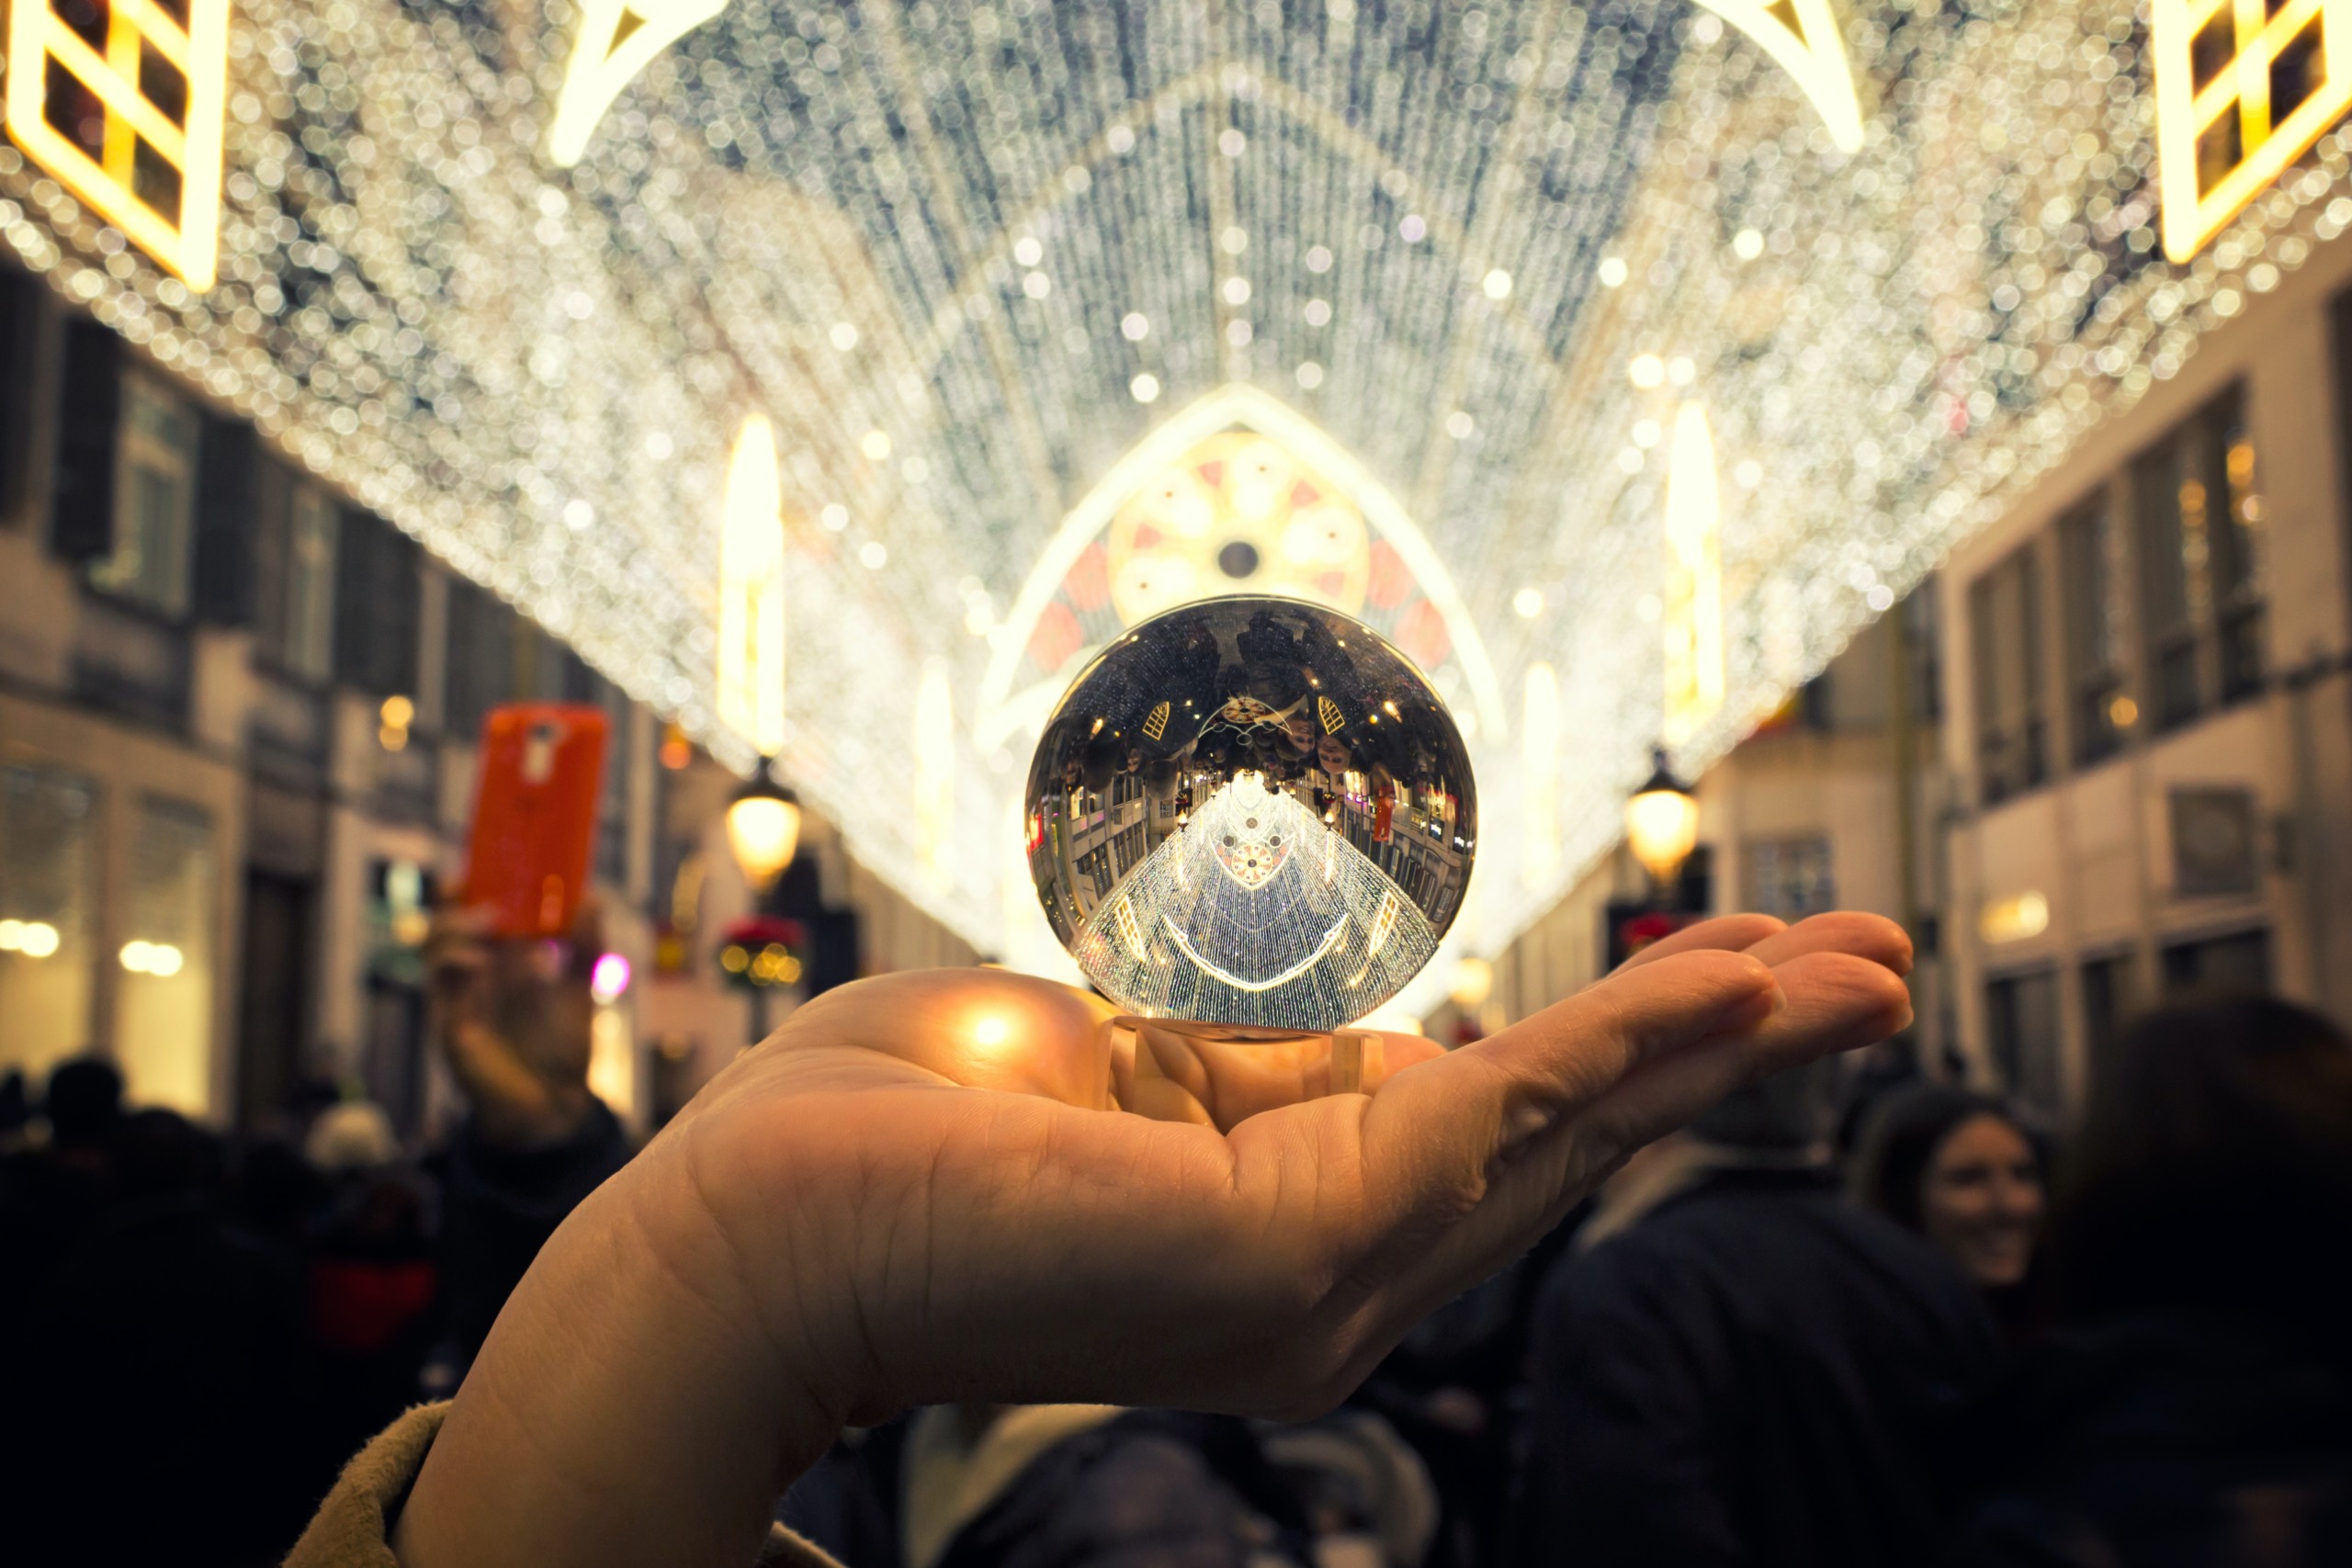 crystal-ball-photography-javier-gonzales-1083817-pexels